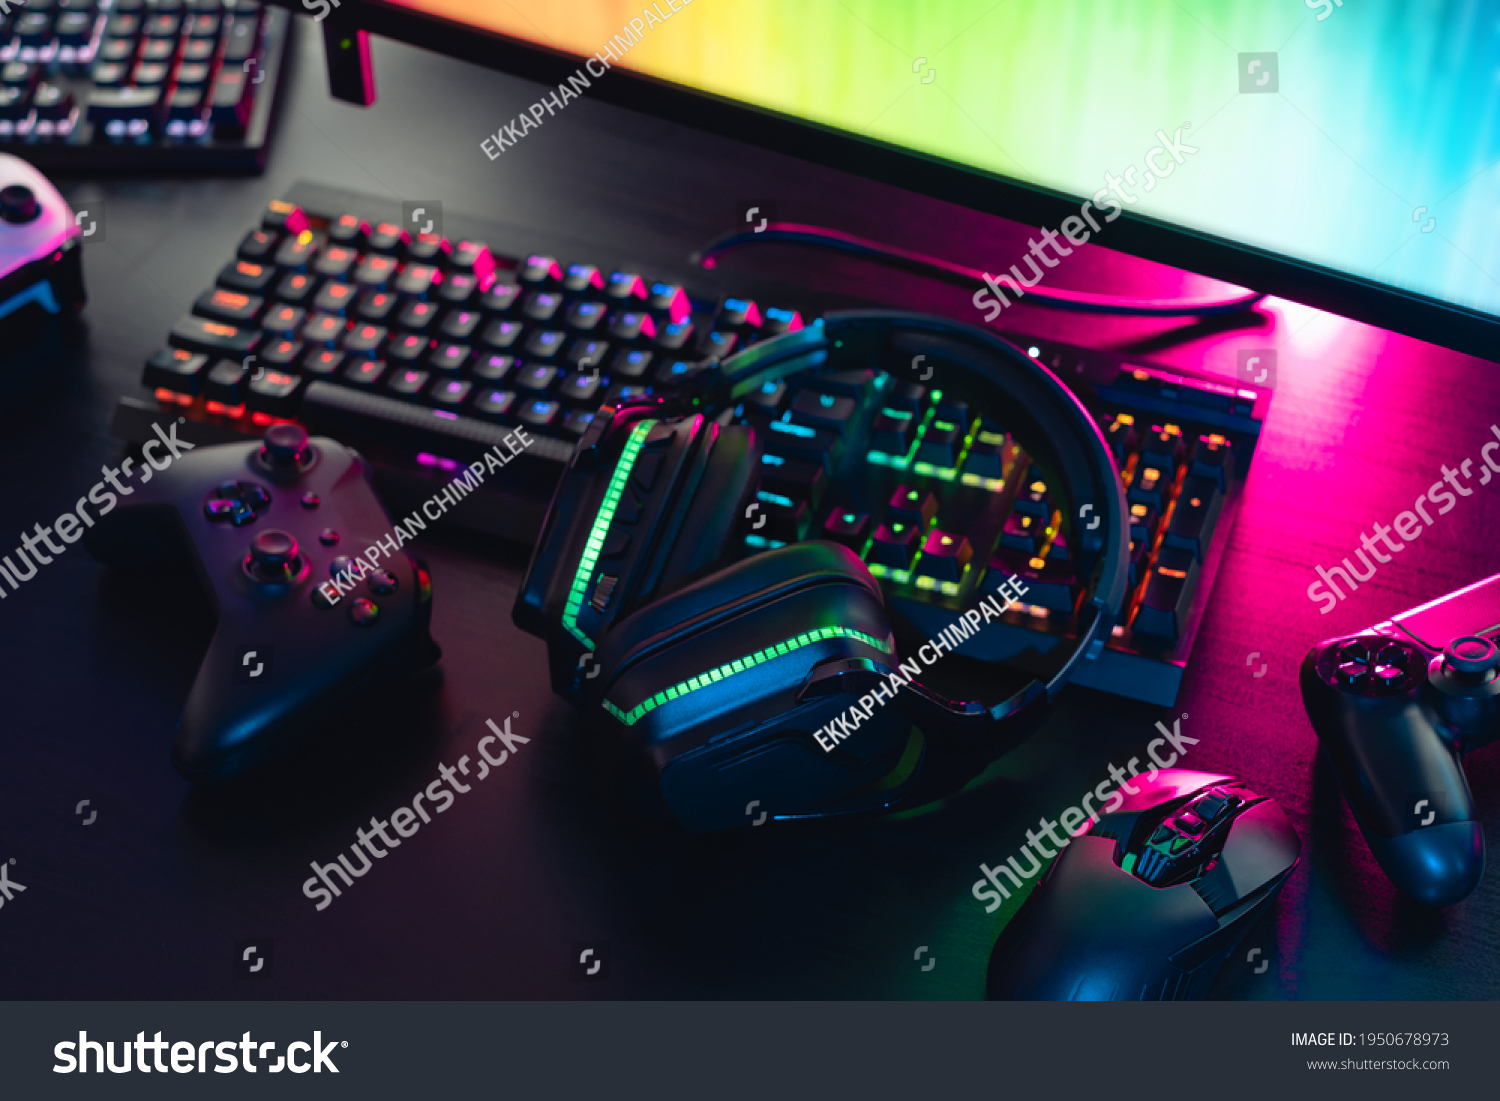 gamer work space concept, top view a gaming gear, mouse, keyboard, joystick, headset with rgb color on black table background. #1950678973